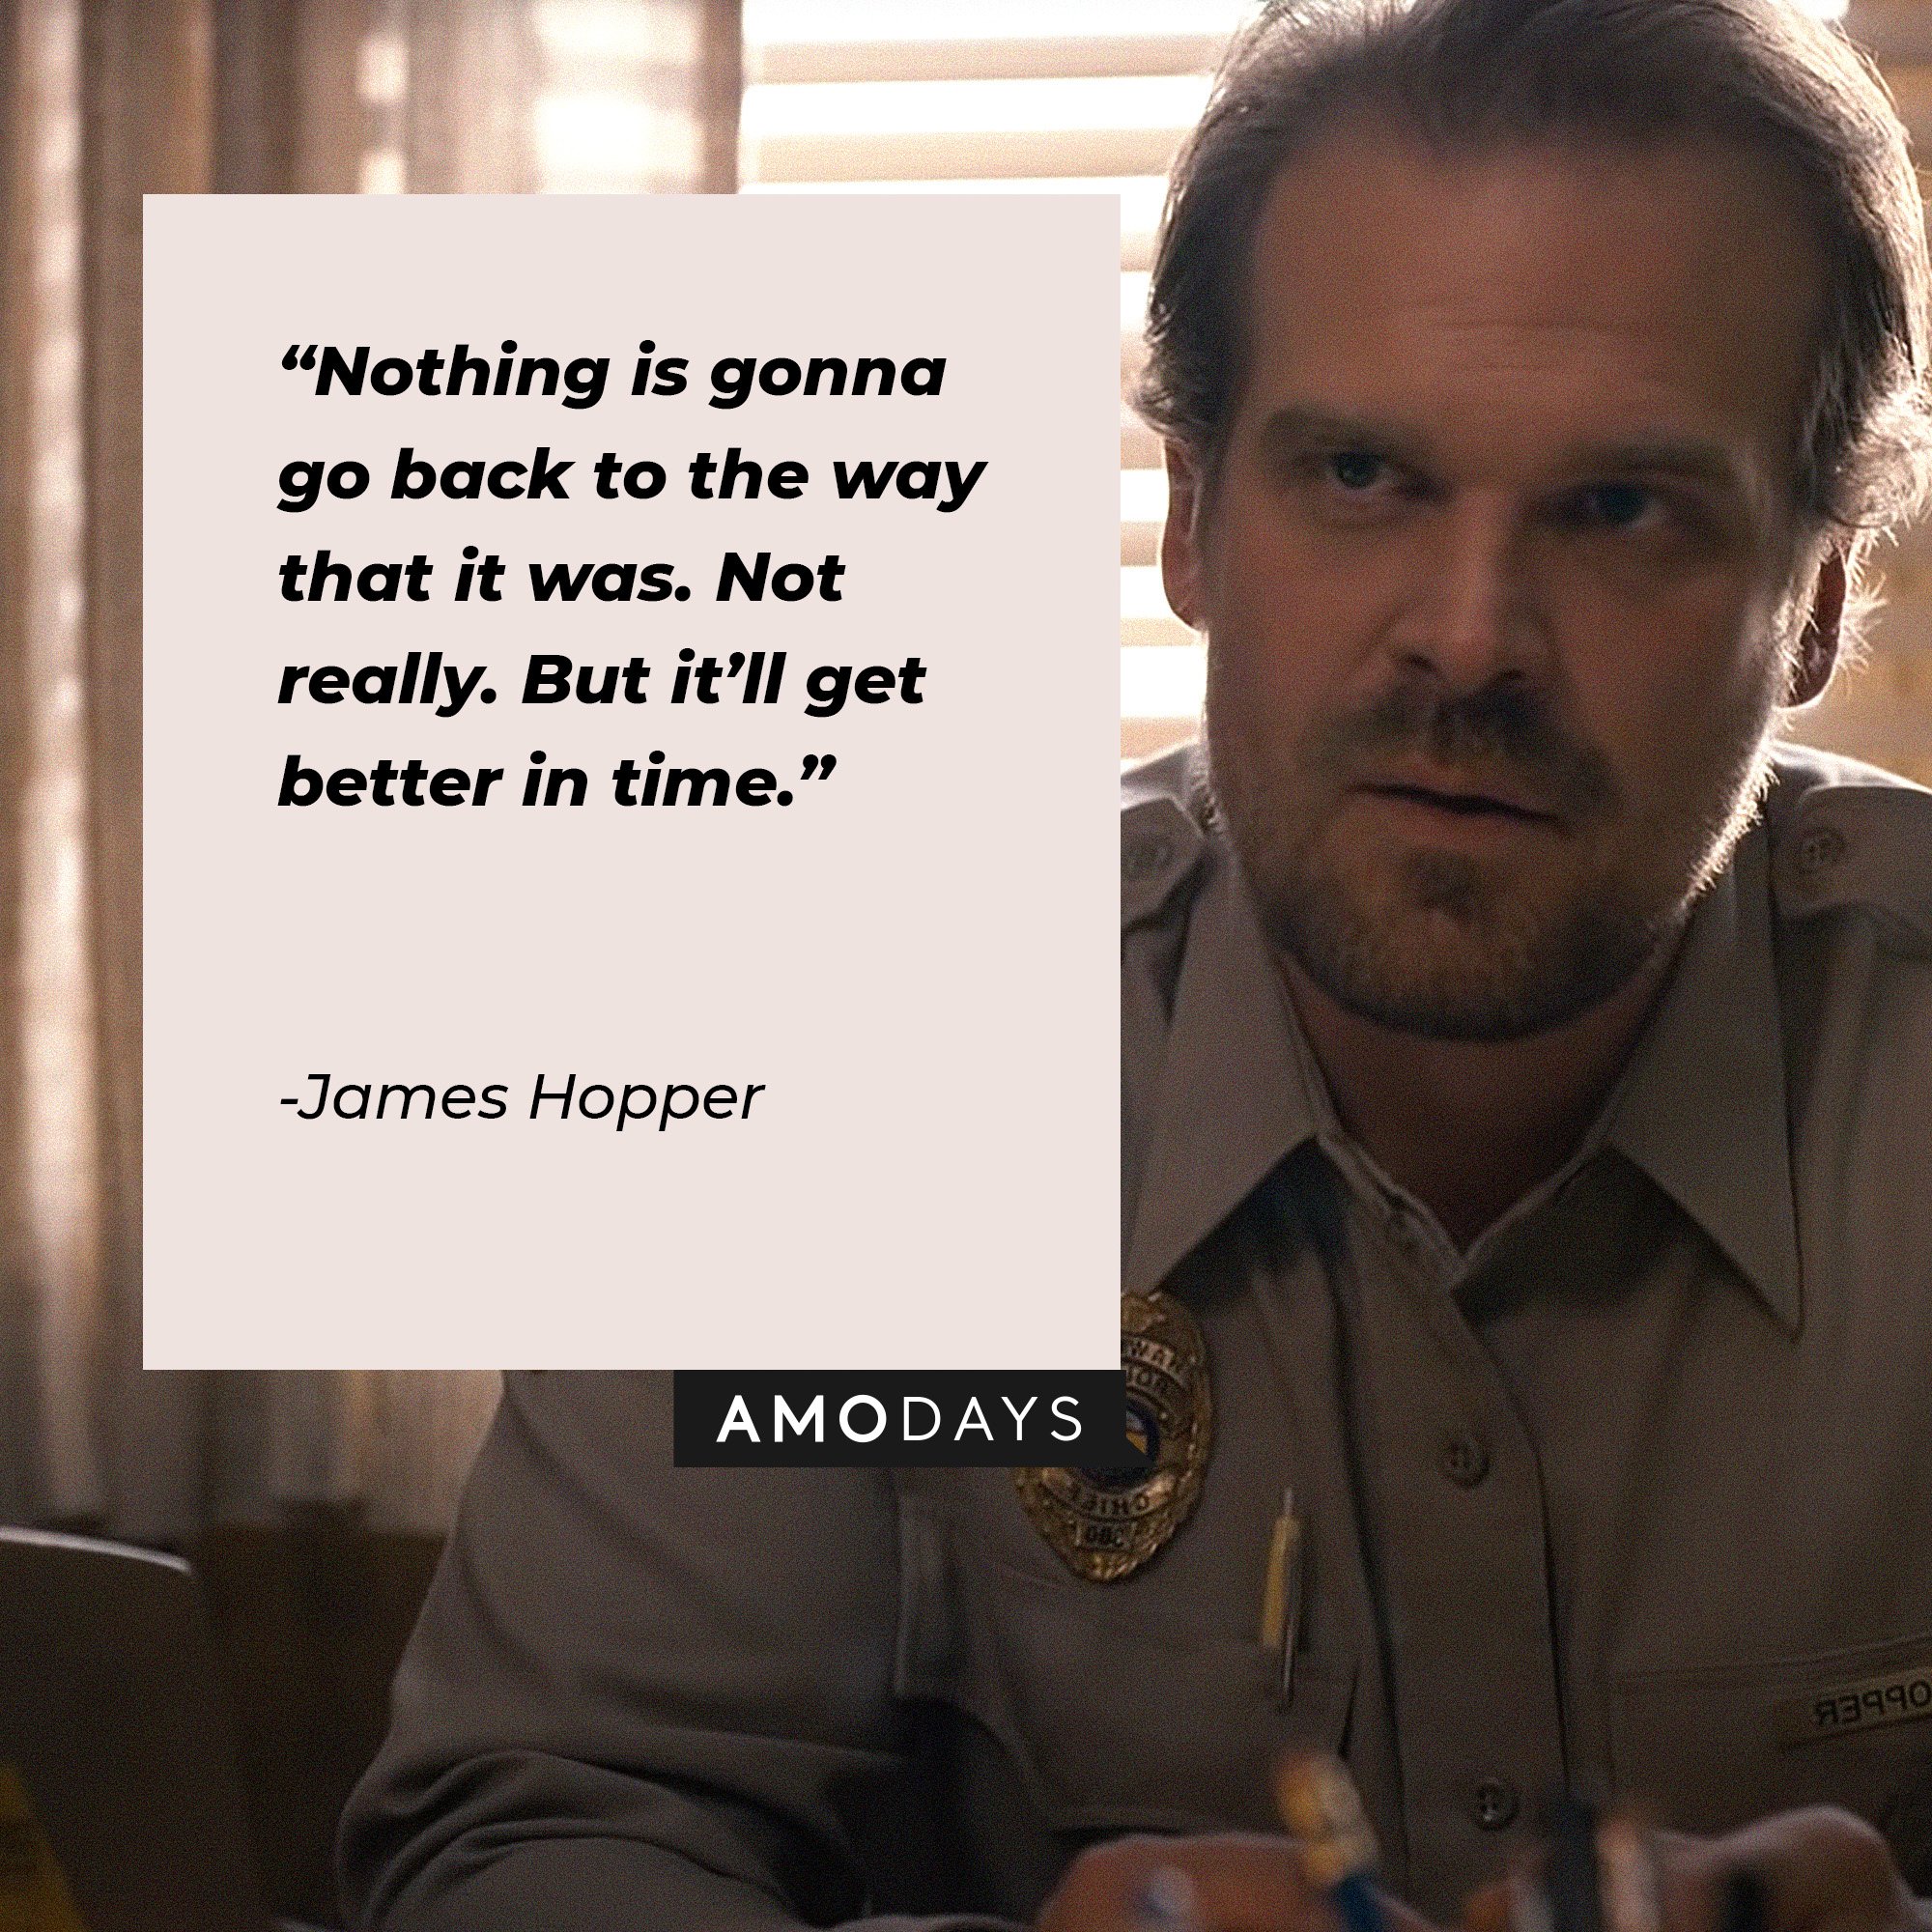 James Hopper’s quote: “Nothing is gonna go back to the way that it was. Not really. But it’ll get better in time.” | Image: AmoDays 